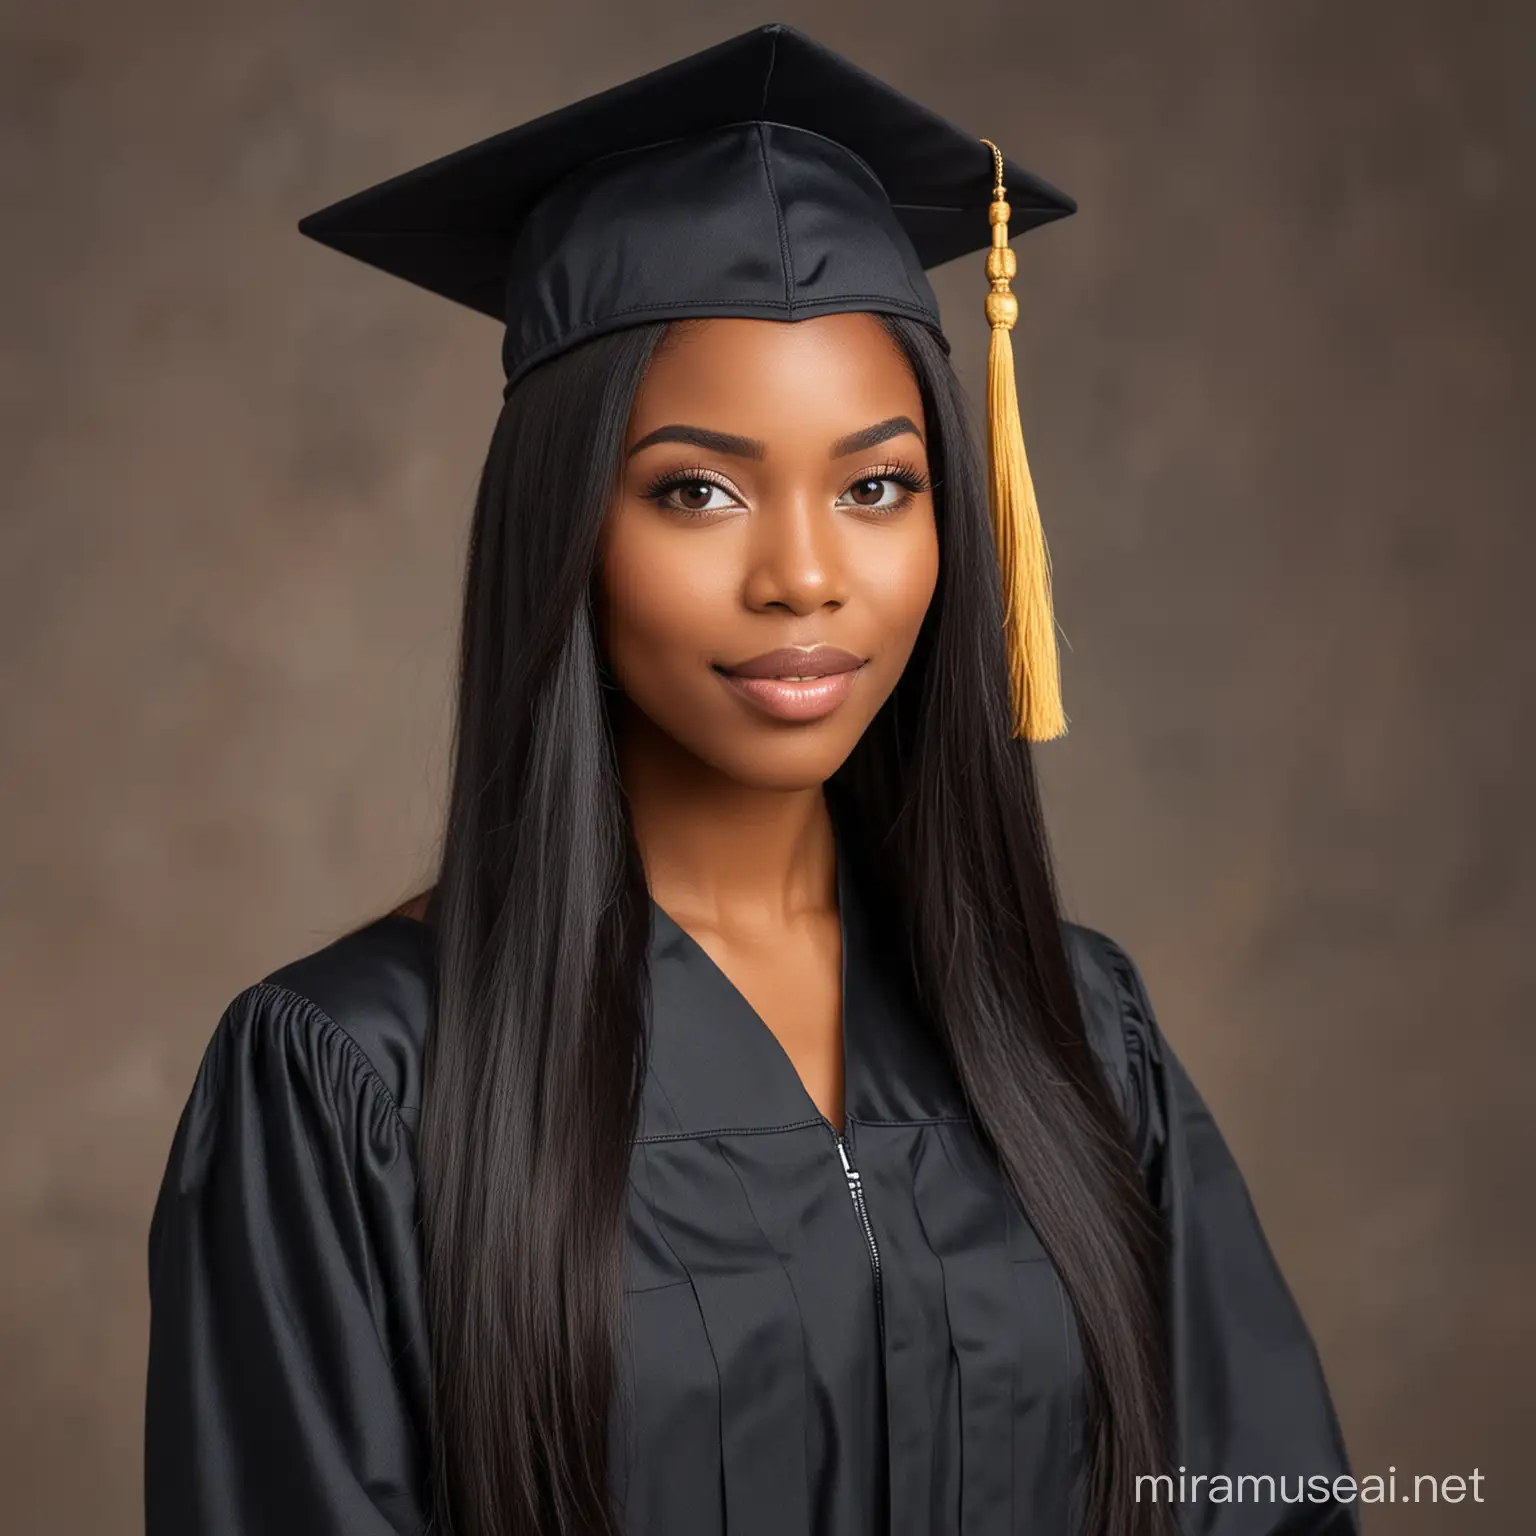 Elegant African American Woman Graduates in Cap and Gown with Radiant Complexion